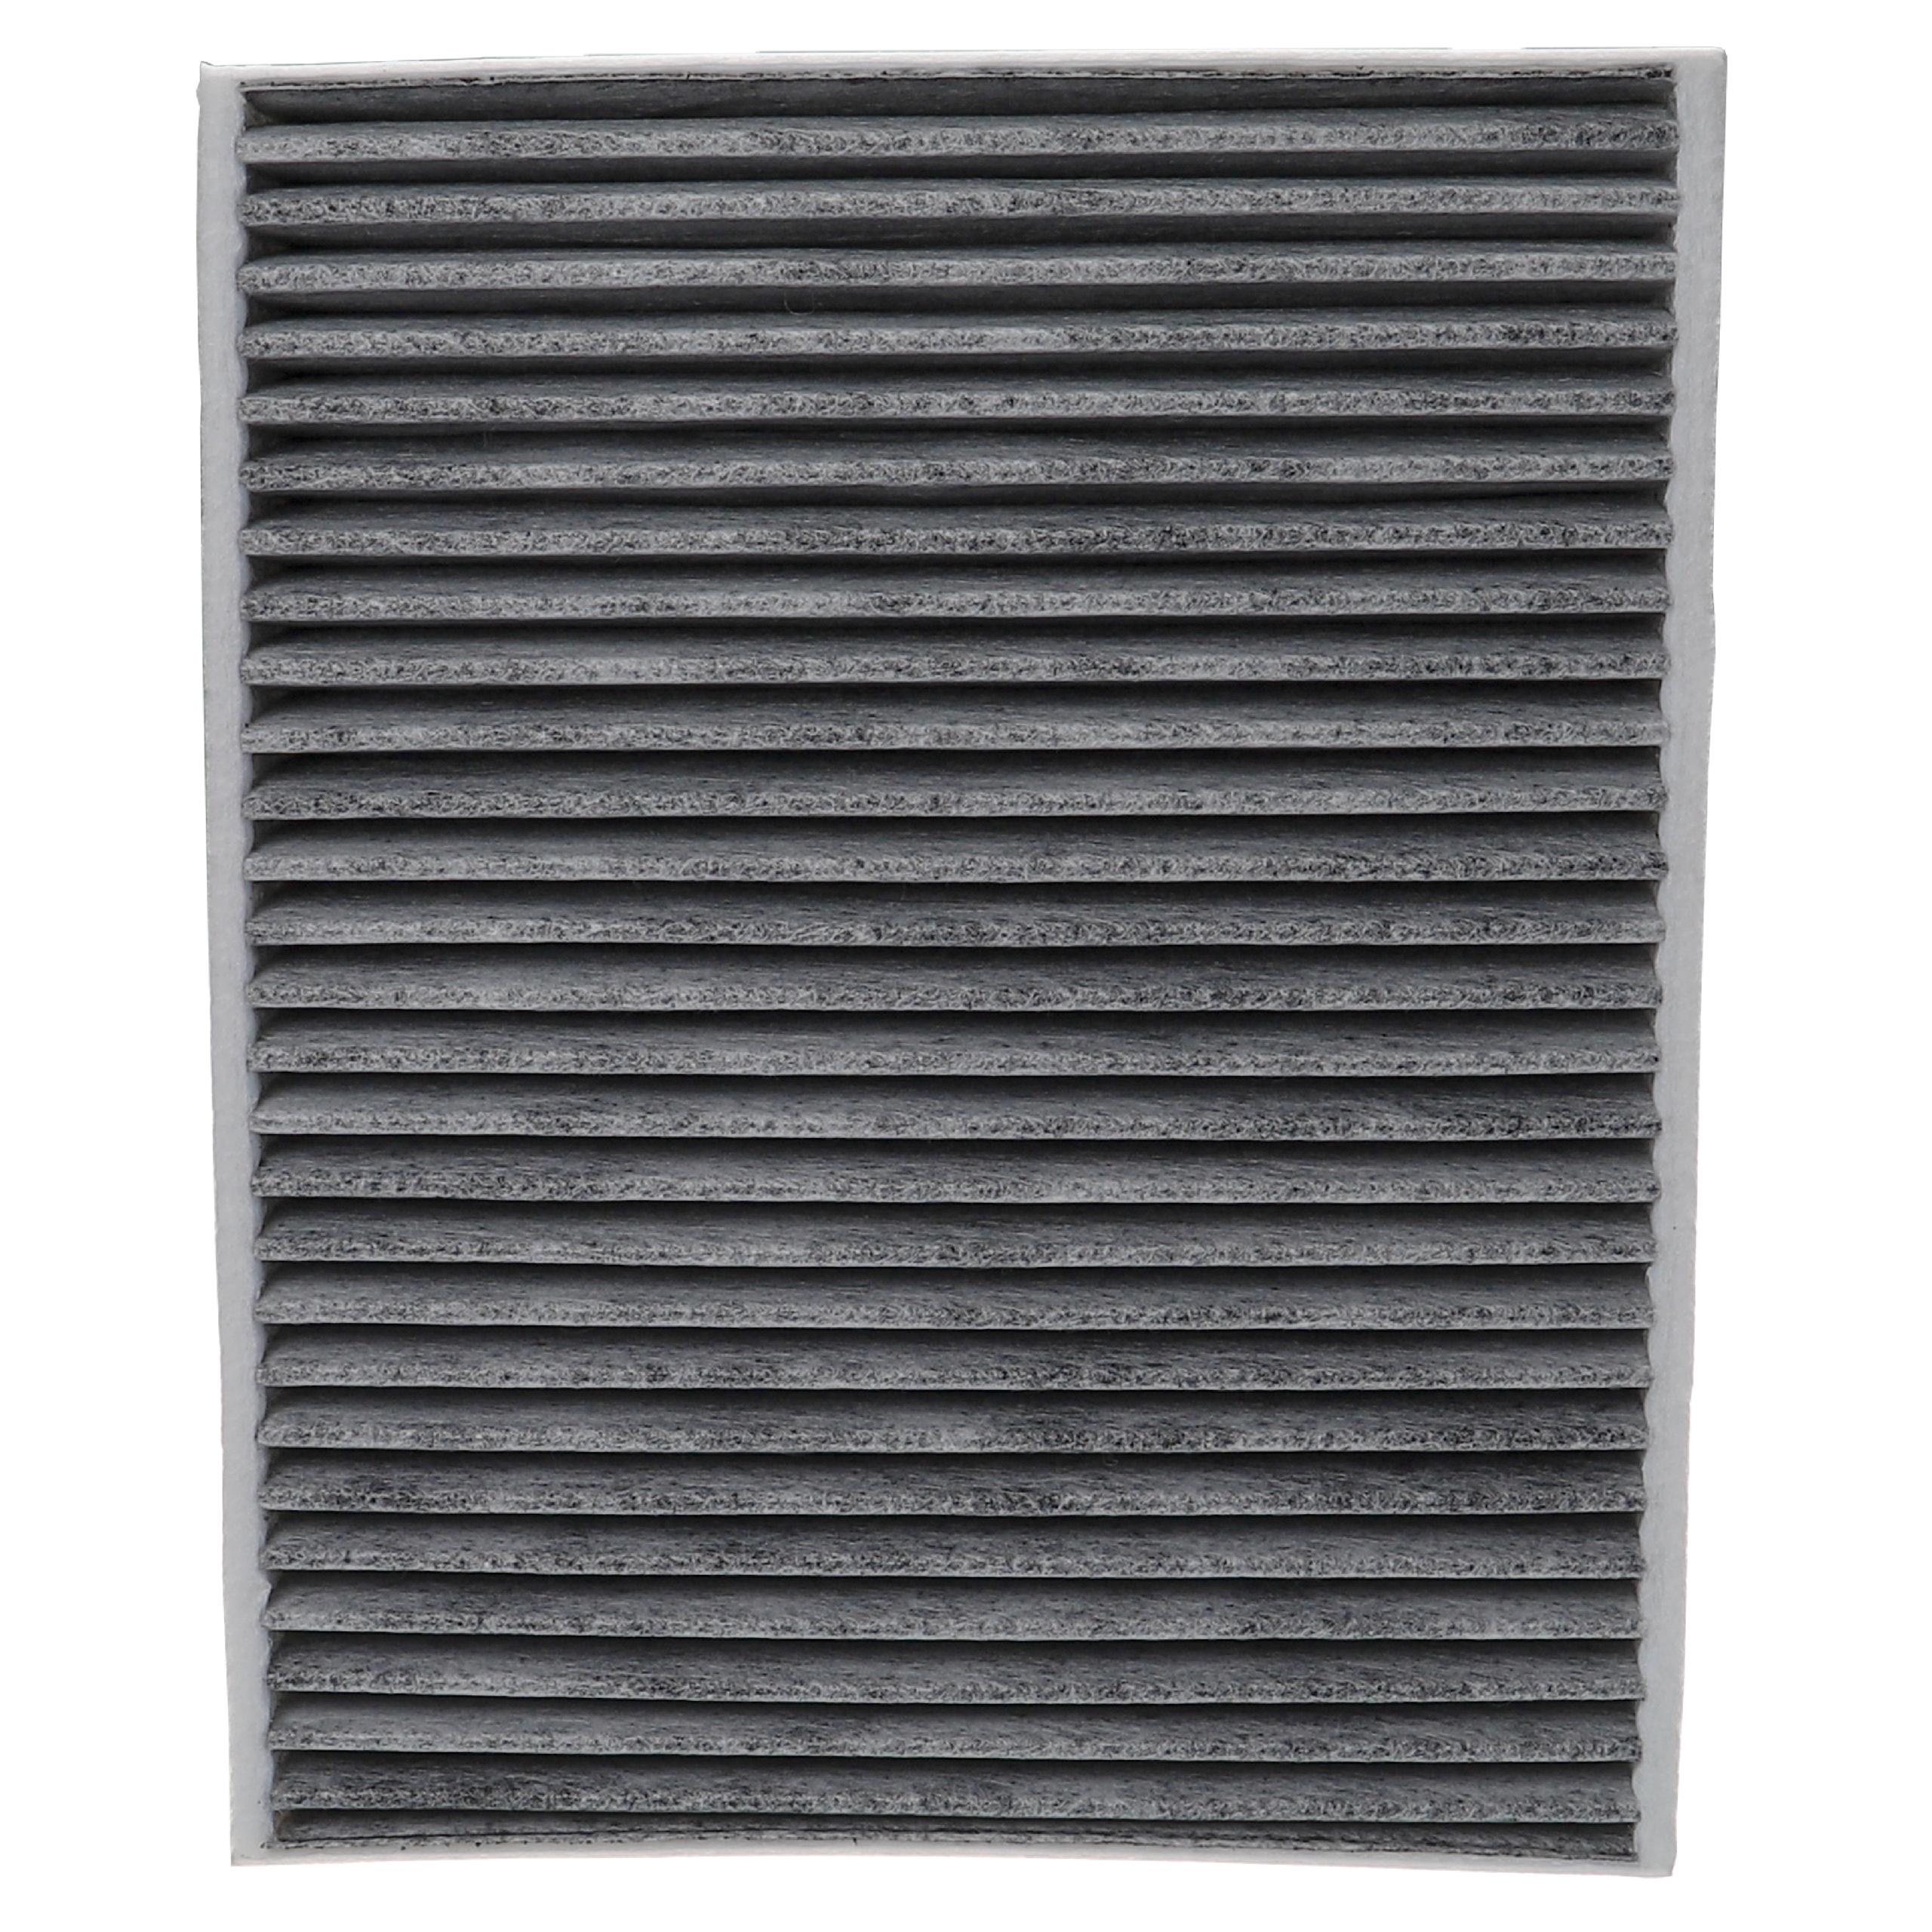 Cabin filter for Quinton Hazell: QFC0349, QFC0512AB